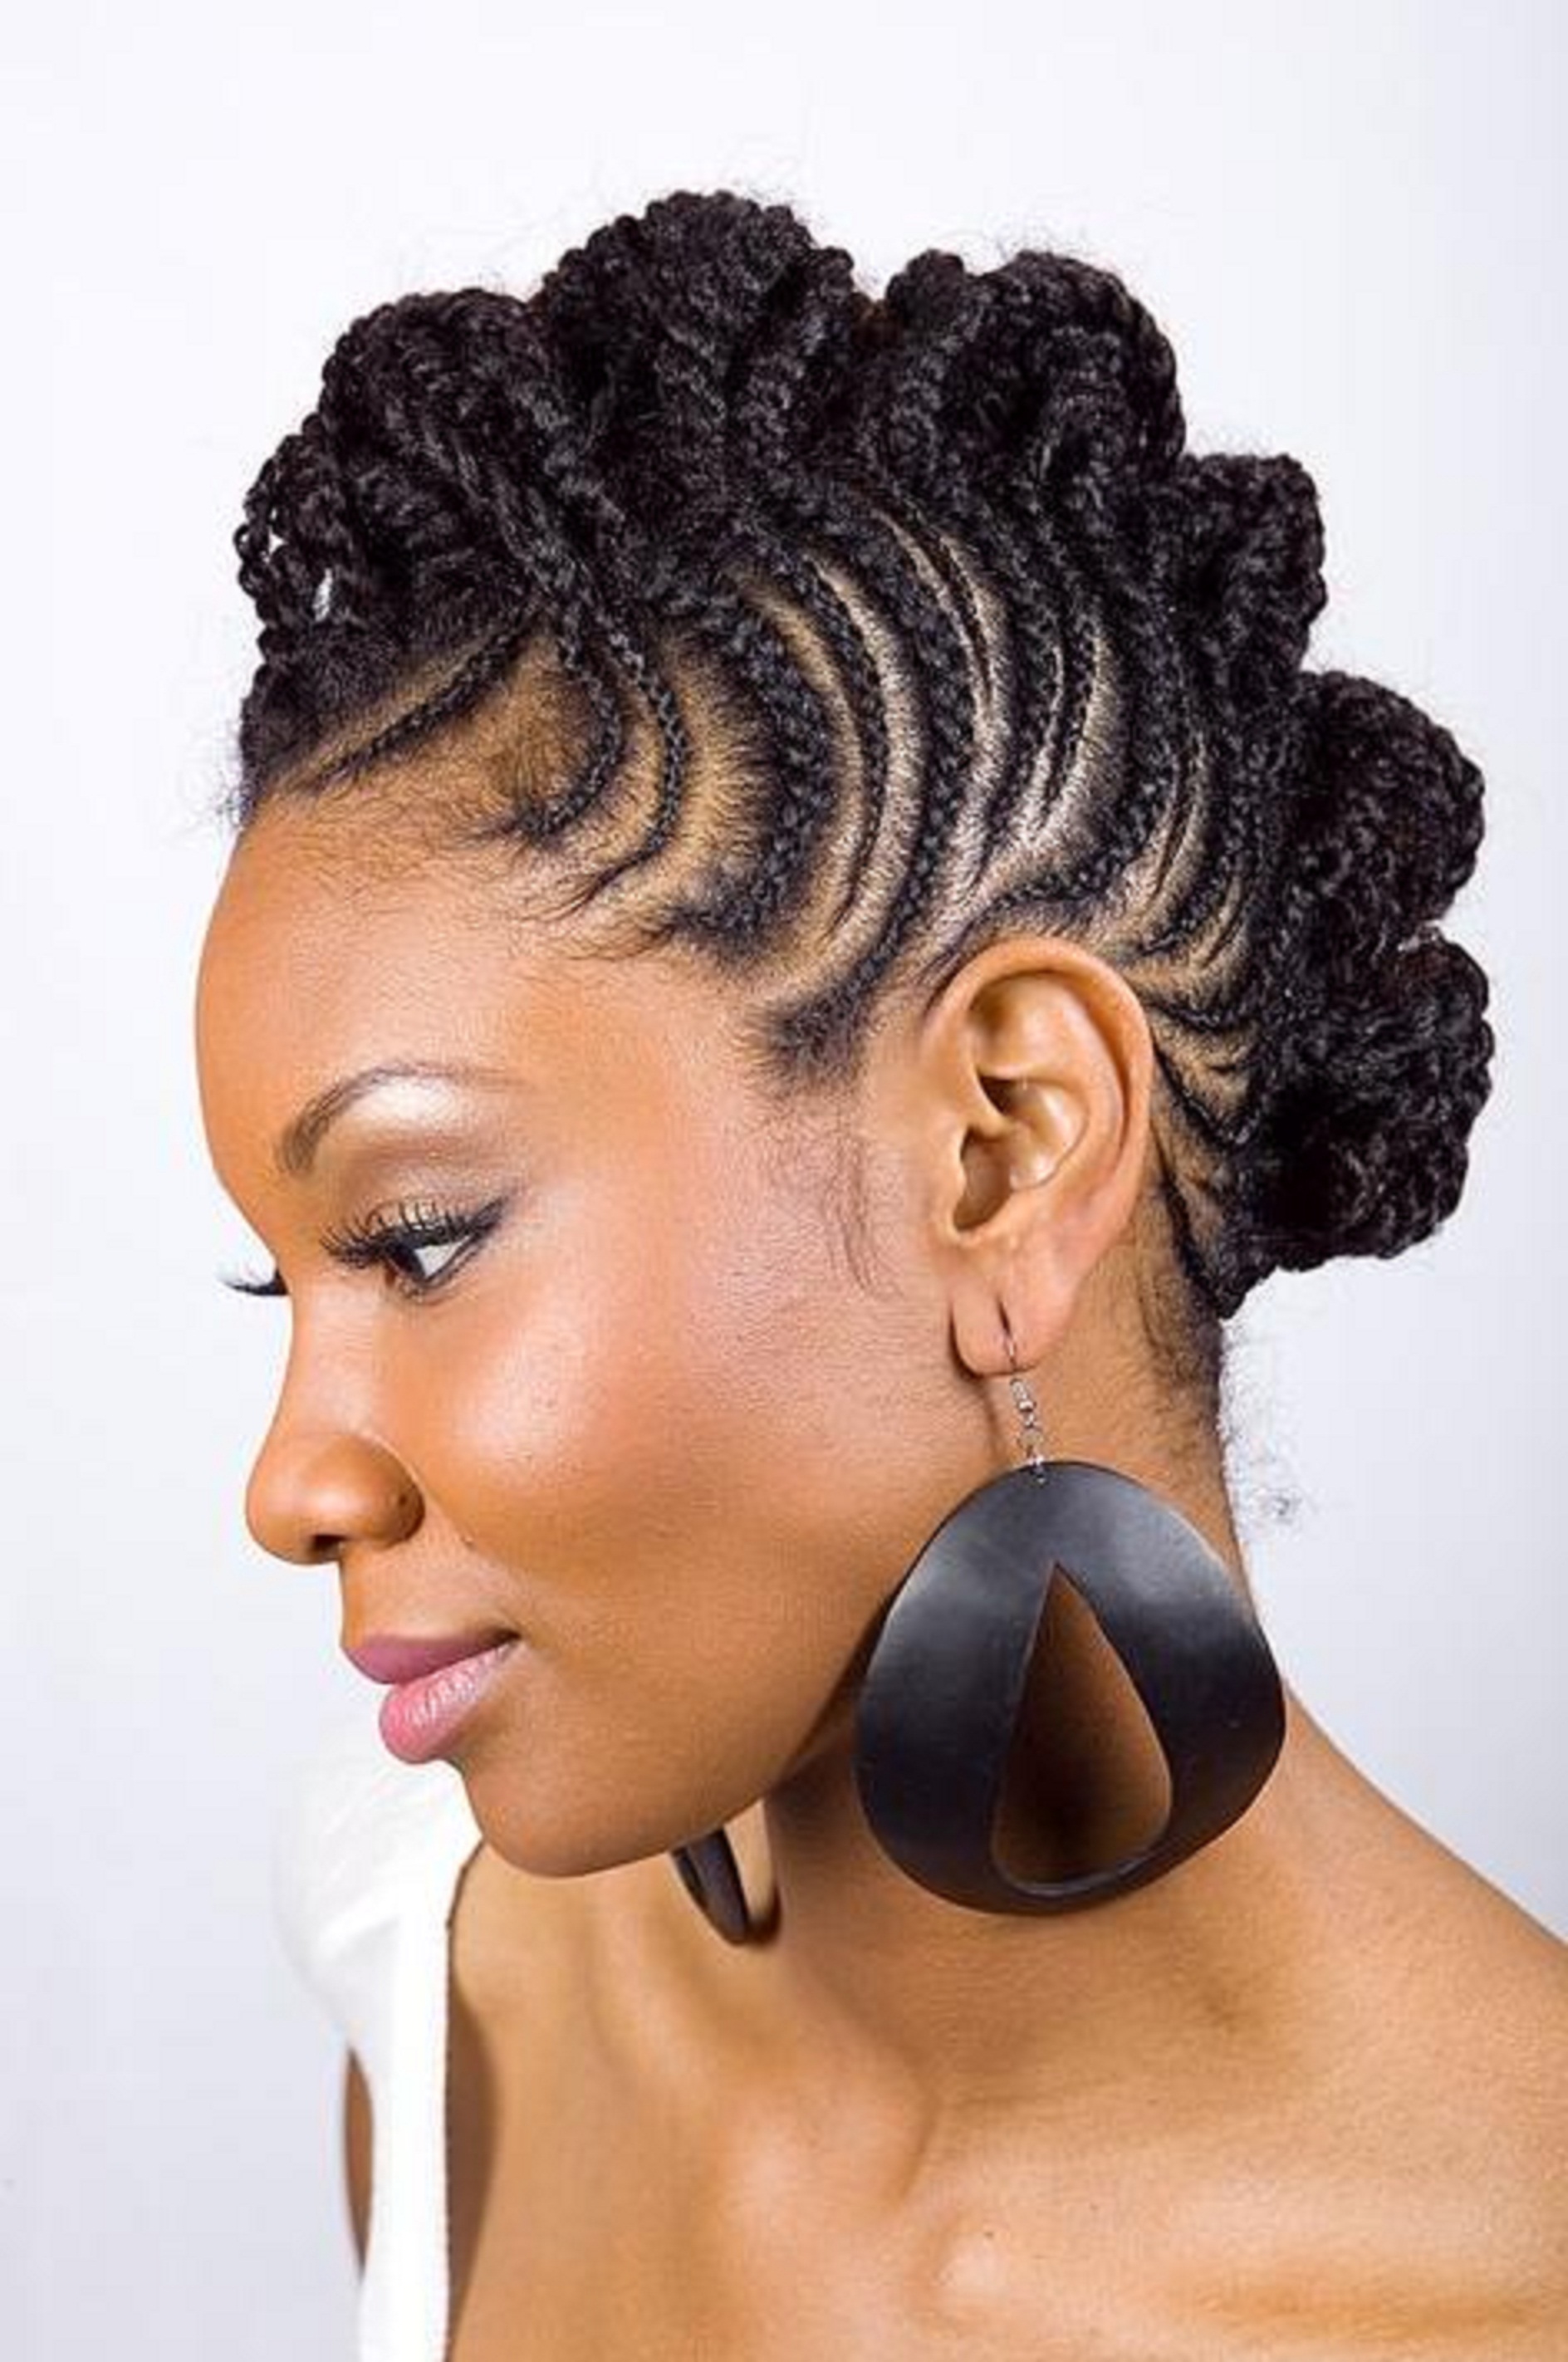 Hair Color Ideas, Black Women Hairstyles With Braid